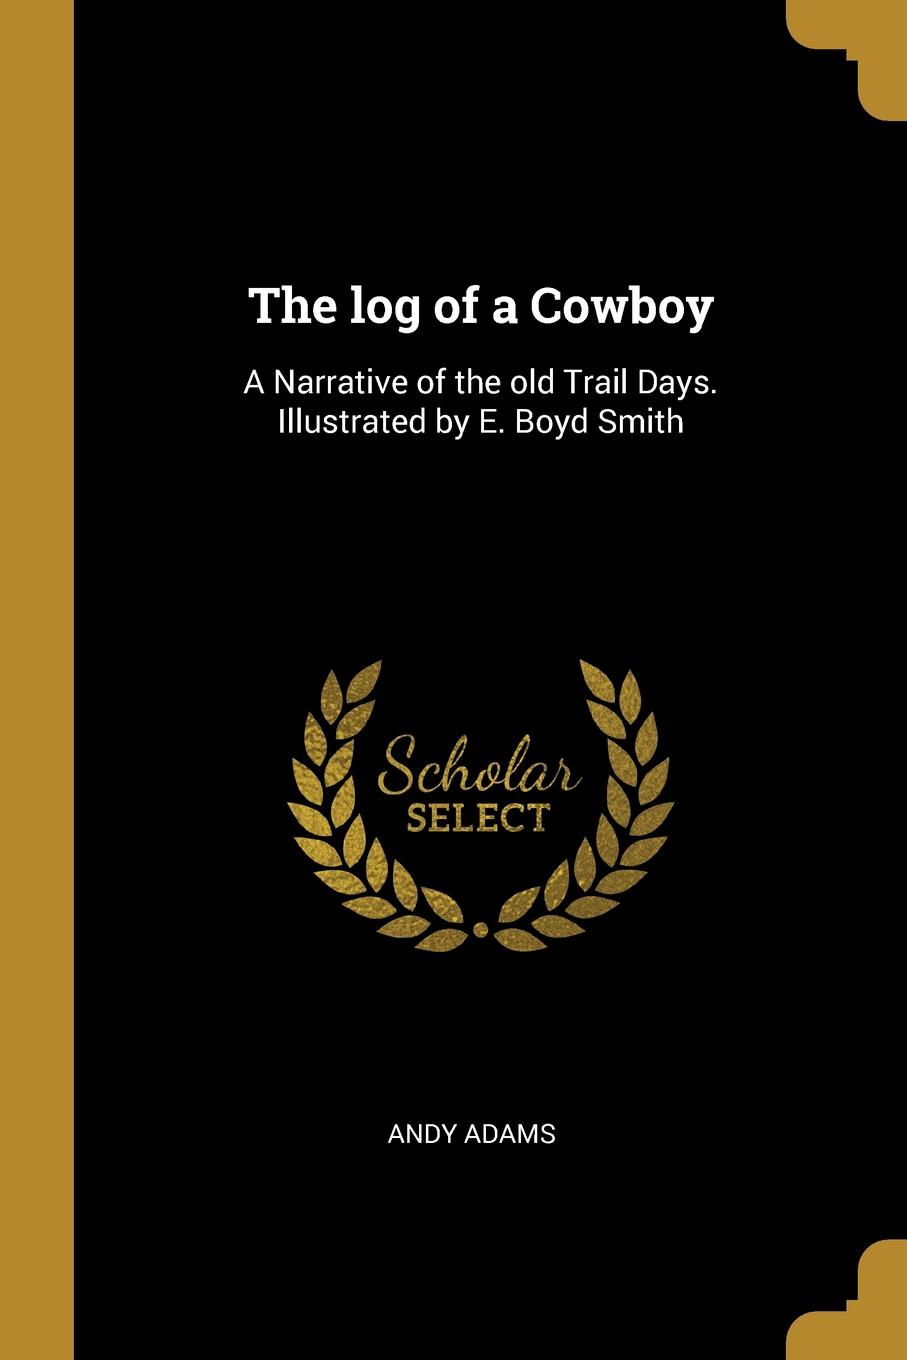 The log of a Cowboy. A Narrative of the old Trail Days. Illustrated by E. Boyd Smith